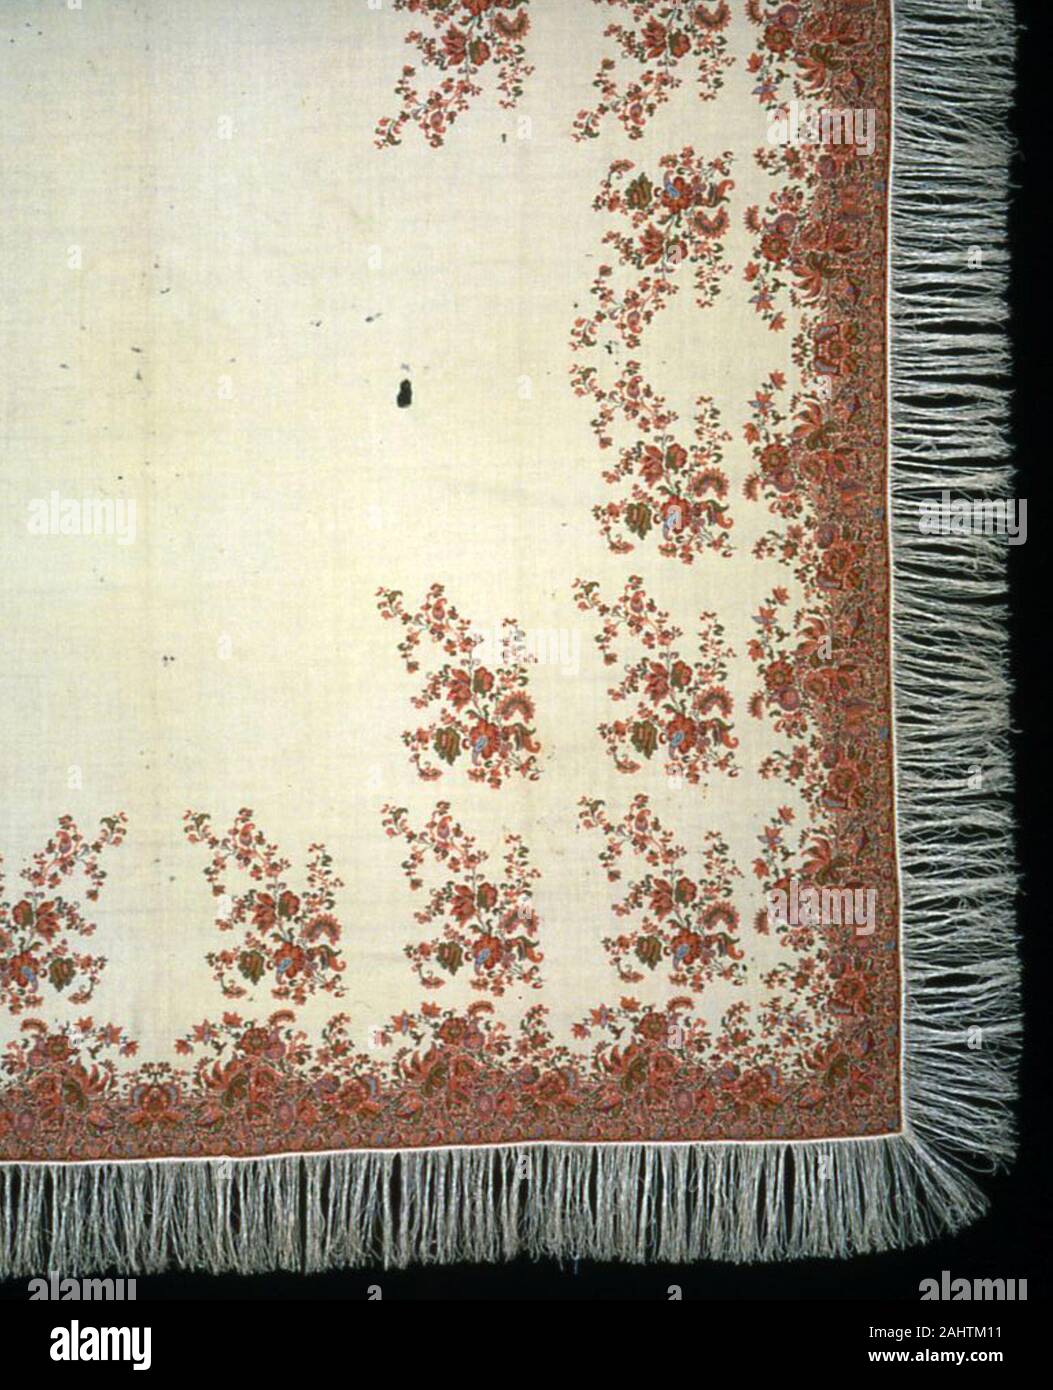 Square Shawl. 1840. England. Wool, silk, and cotton, center of weft-float faced 1 3 'Z' twill weave; patterned areas of warp-float faced 3 1 'Z' twill weave with supplementary patterning wefts bound in weft-float faced 1 3 'Z' twill interlacings; attached silk, warp-faced weft ribbed plain weave extended ground weft fringe; two selvages present; woven on loom with Jacquard attachment Stock Photo